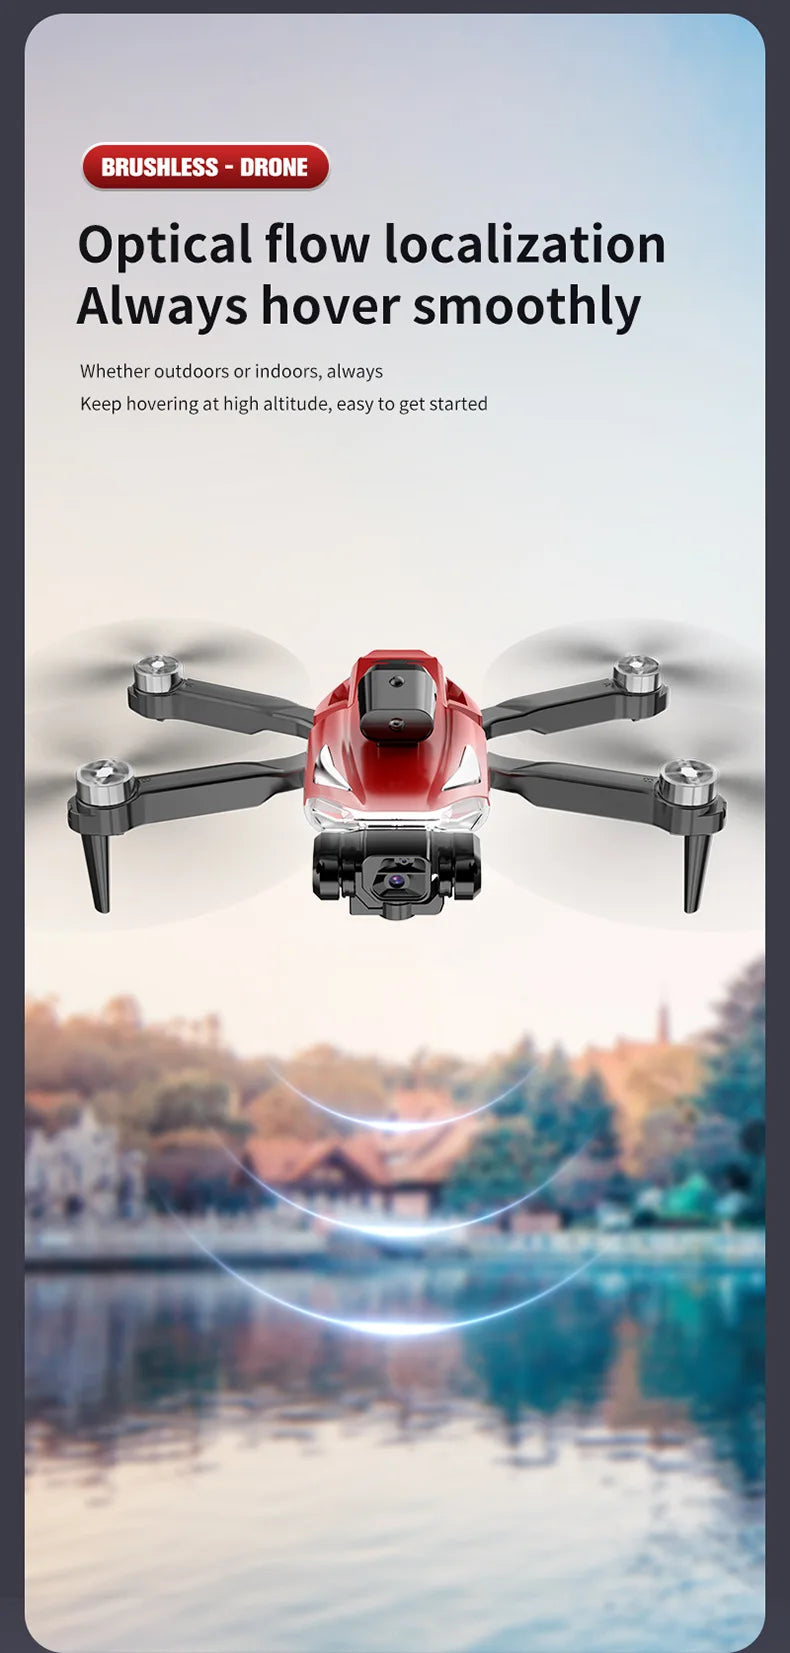 S178 L818 Drone, drone optical flow localization always hover smoothly whether outdoors or indoors 